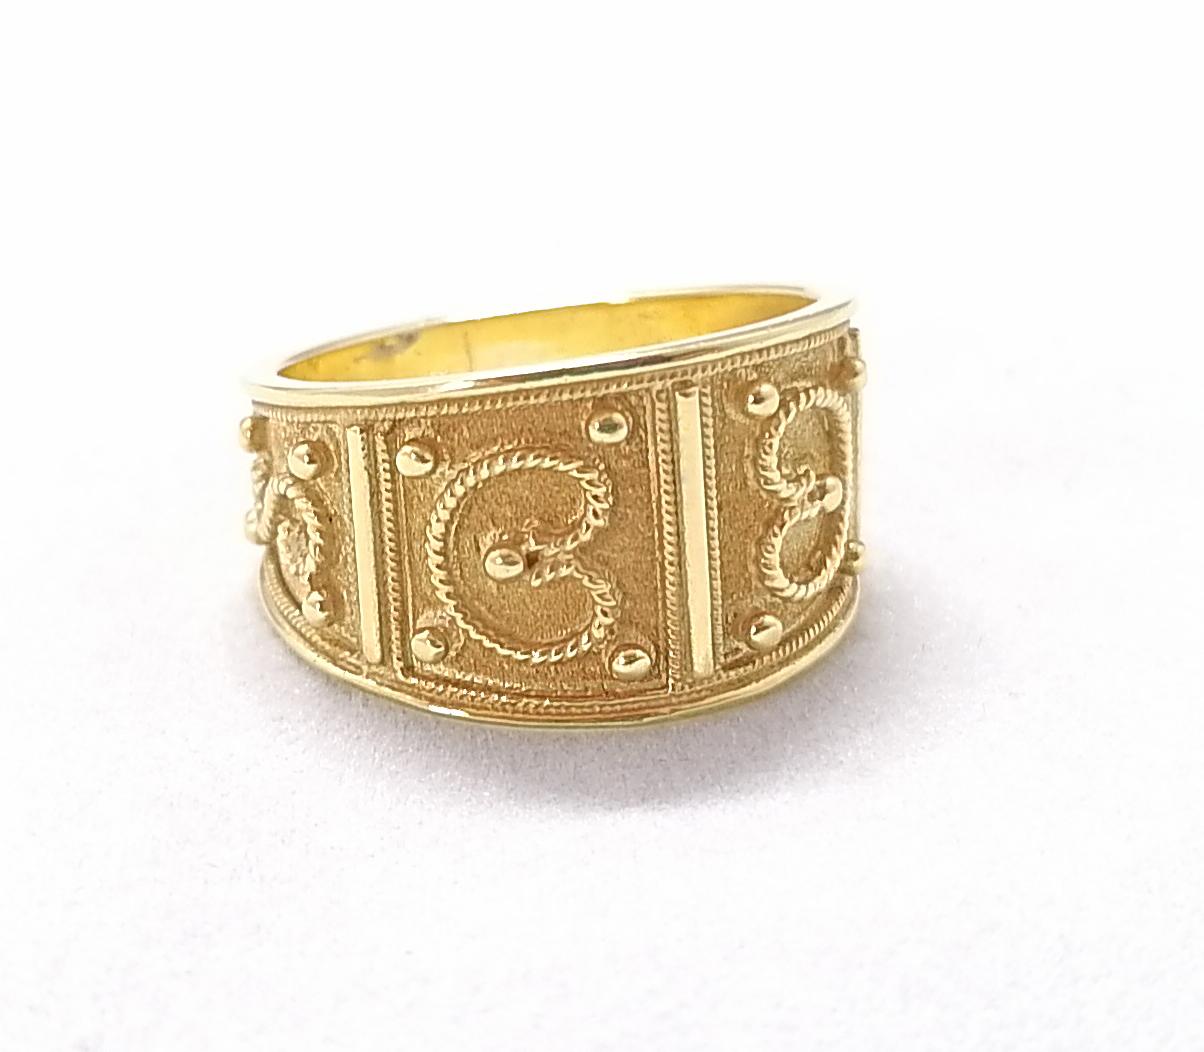 S.Georgios designer band ring is made from solid 18 Karat Yellow Gold and is microscopically decorated with handmade granulation work to create a stunning and elegant art piece. We have finished this beautiful band with a unique velvet background to